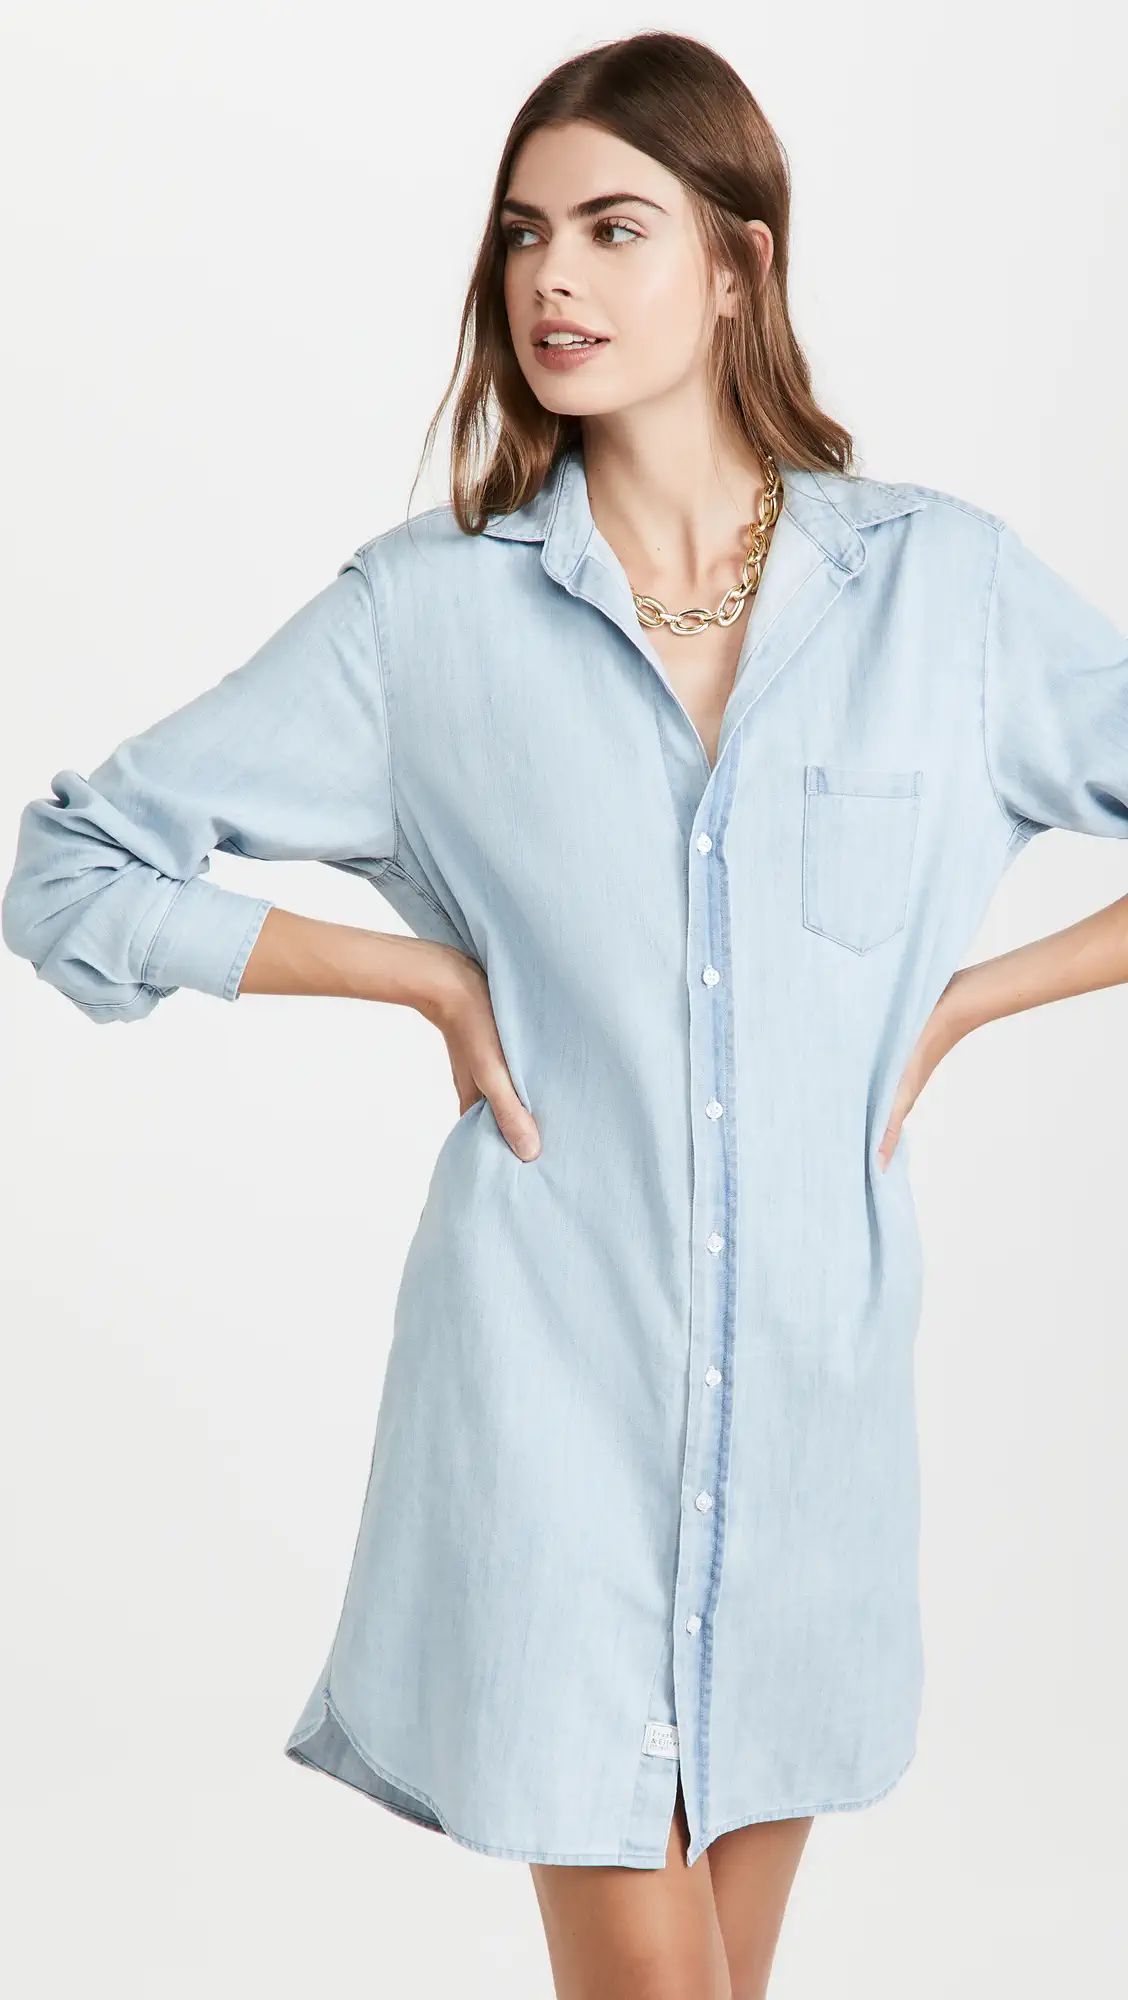 Mary Button Up Dress | Shopbop